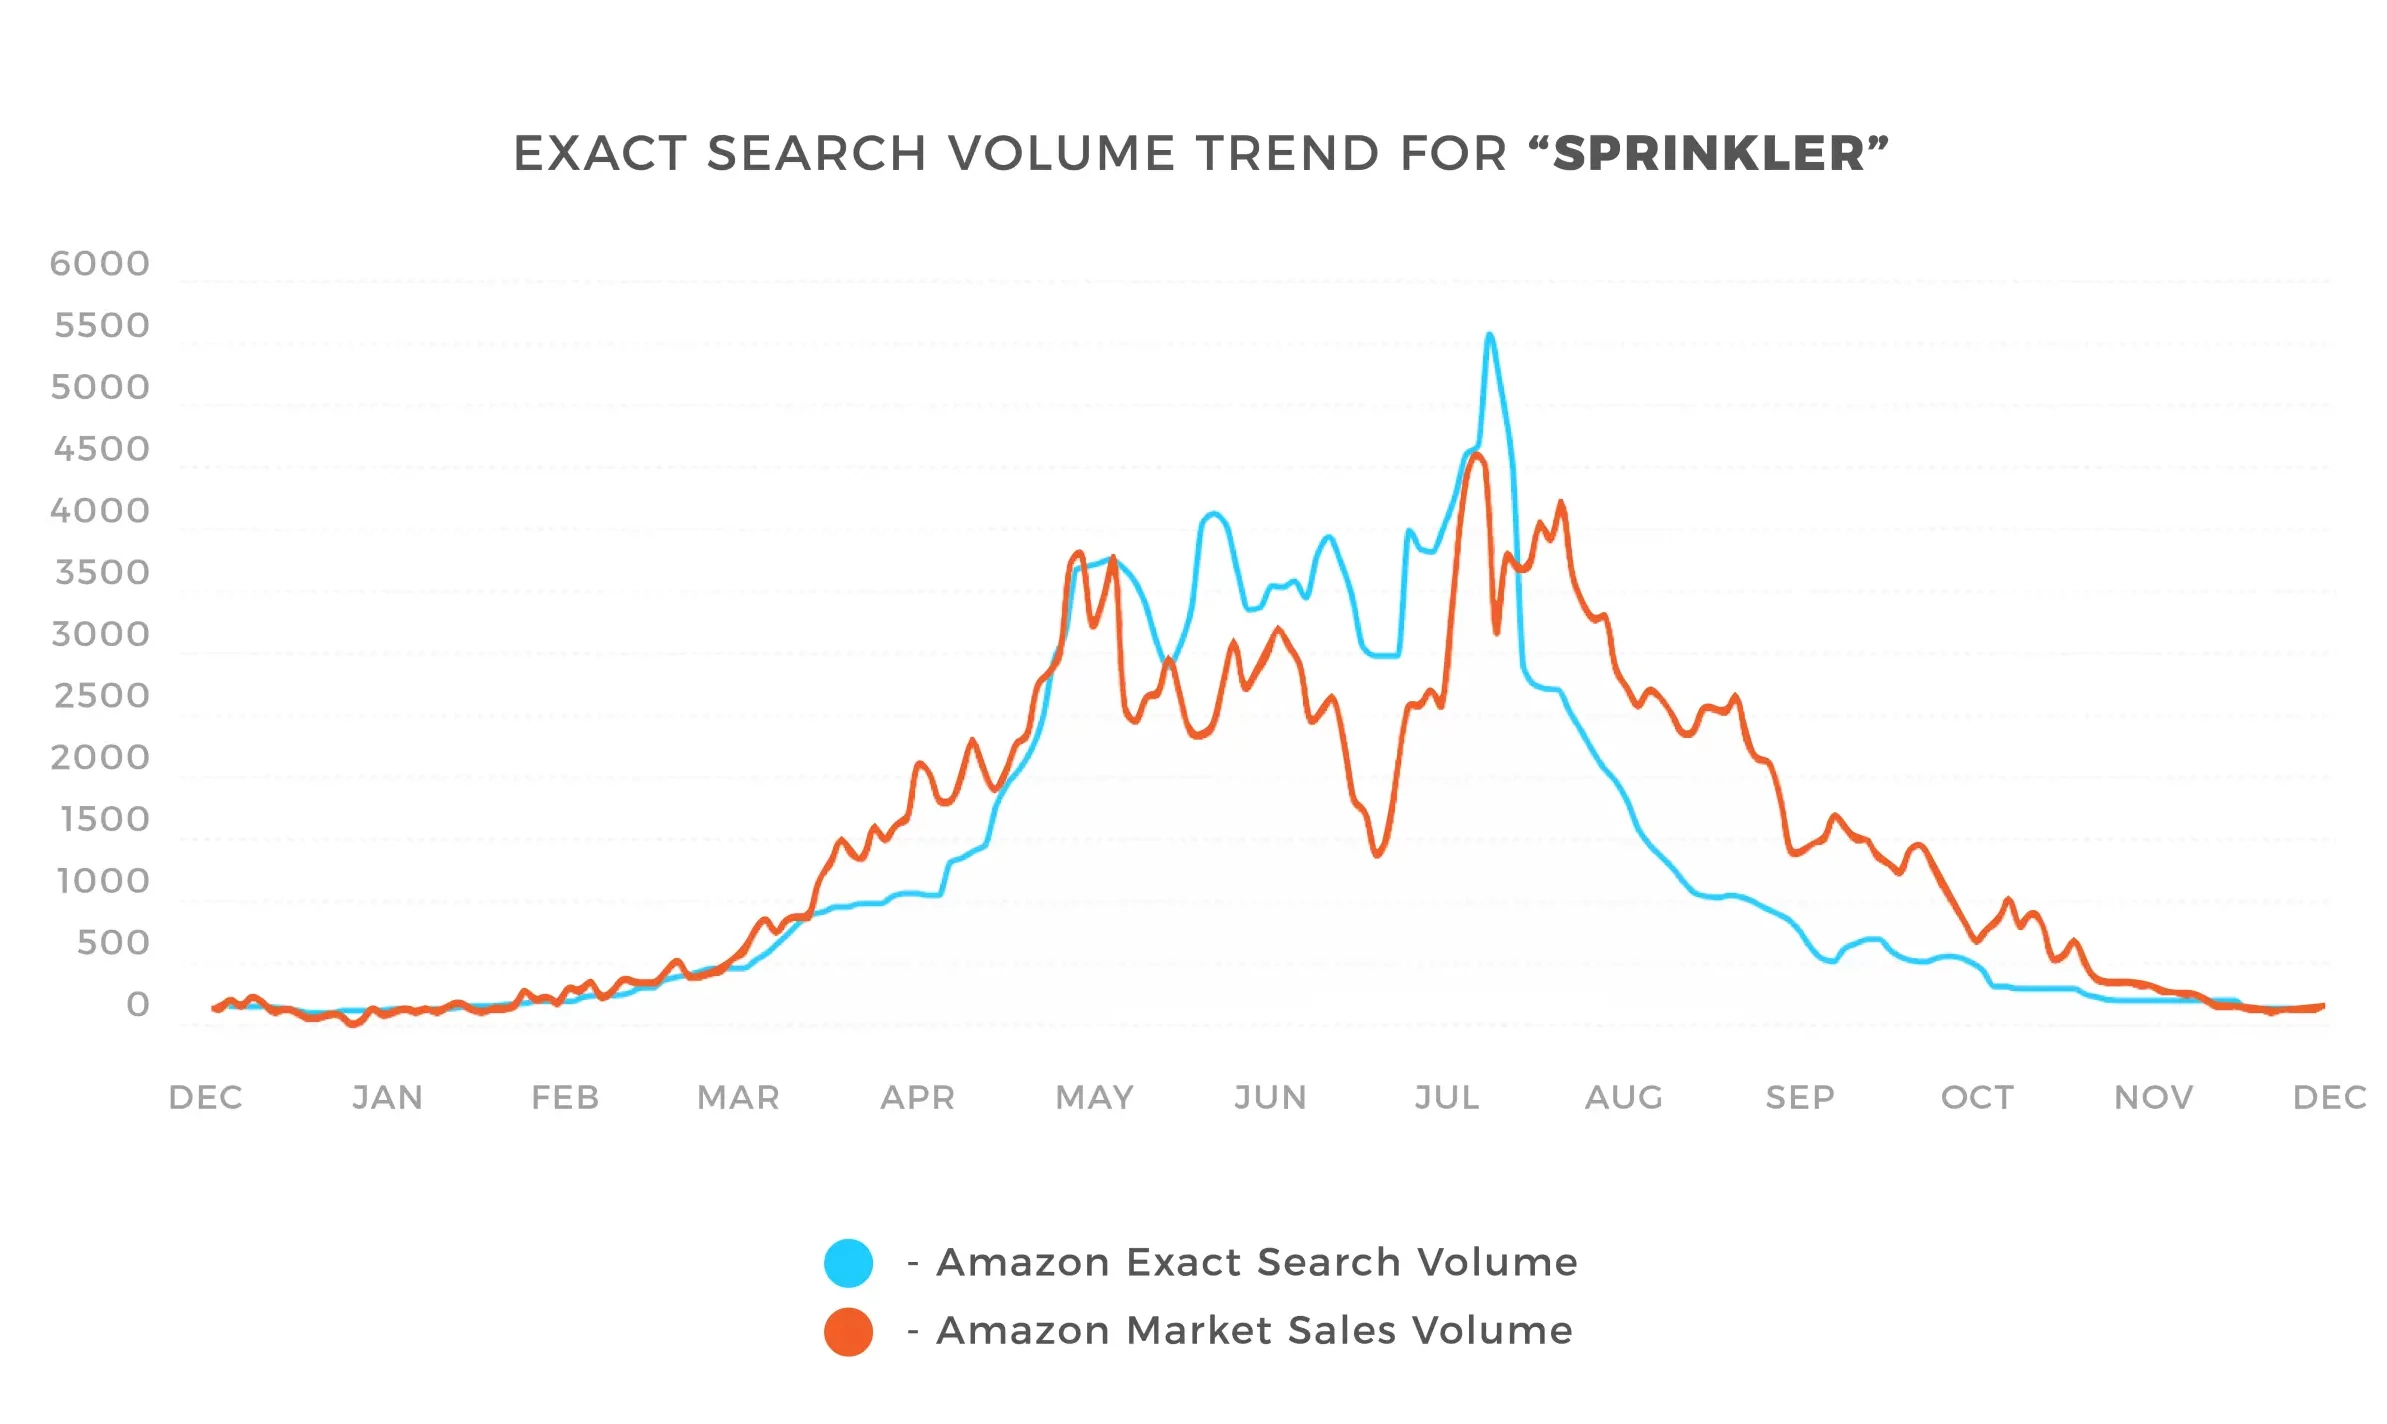 A graph showing the exact Amazon search volume trend data correlates with the Market sales trend volume 